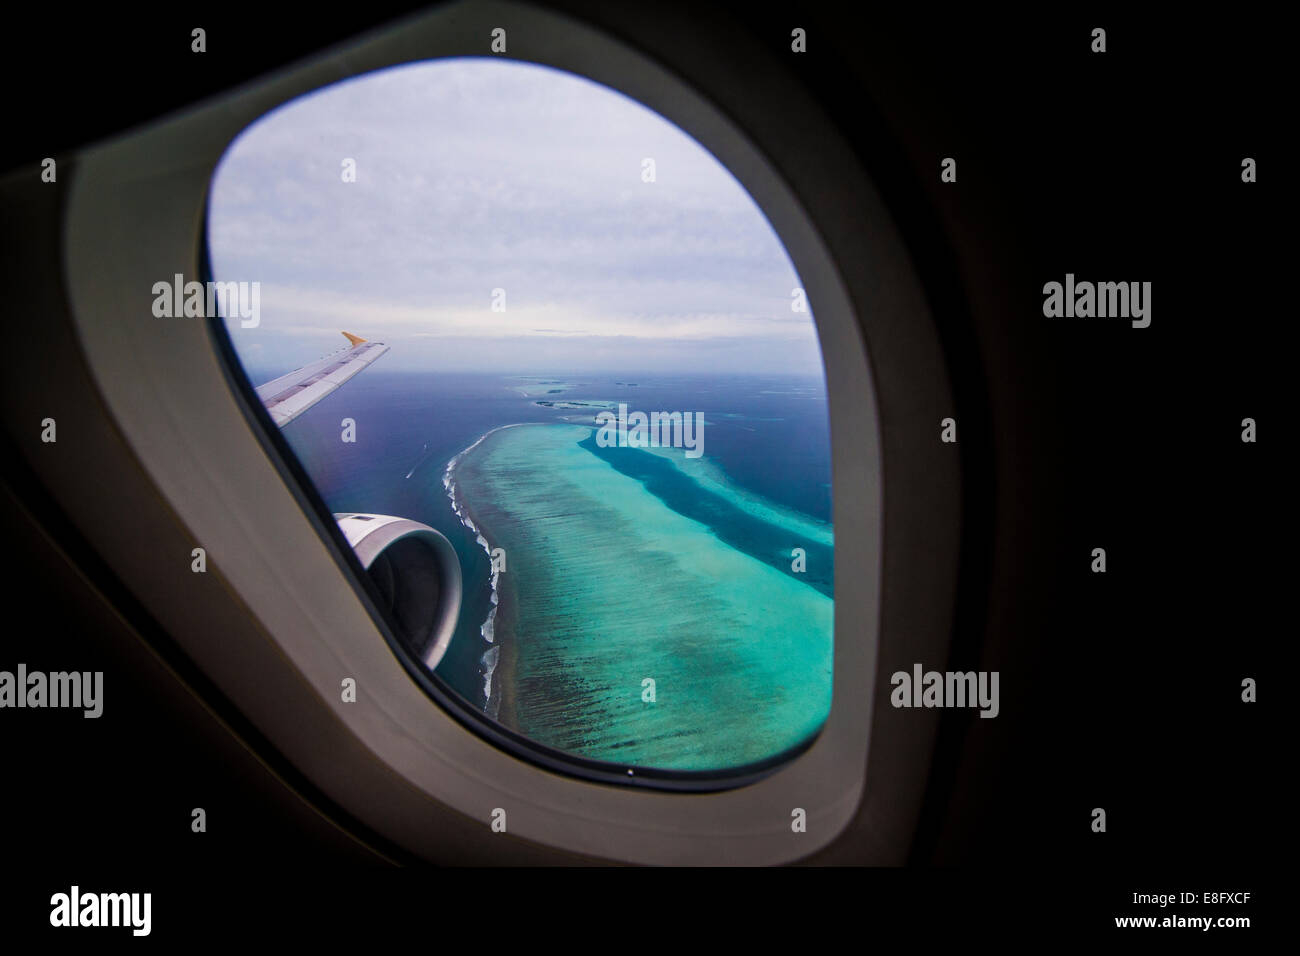 Tropical islands seen from plane window, Maldives Stock Photo